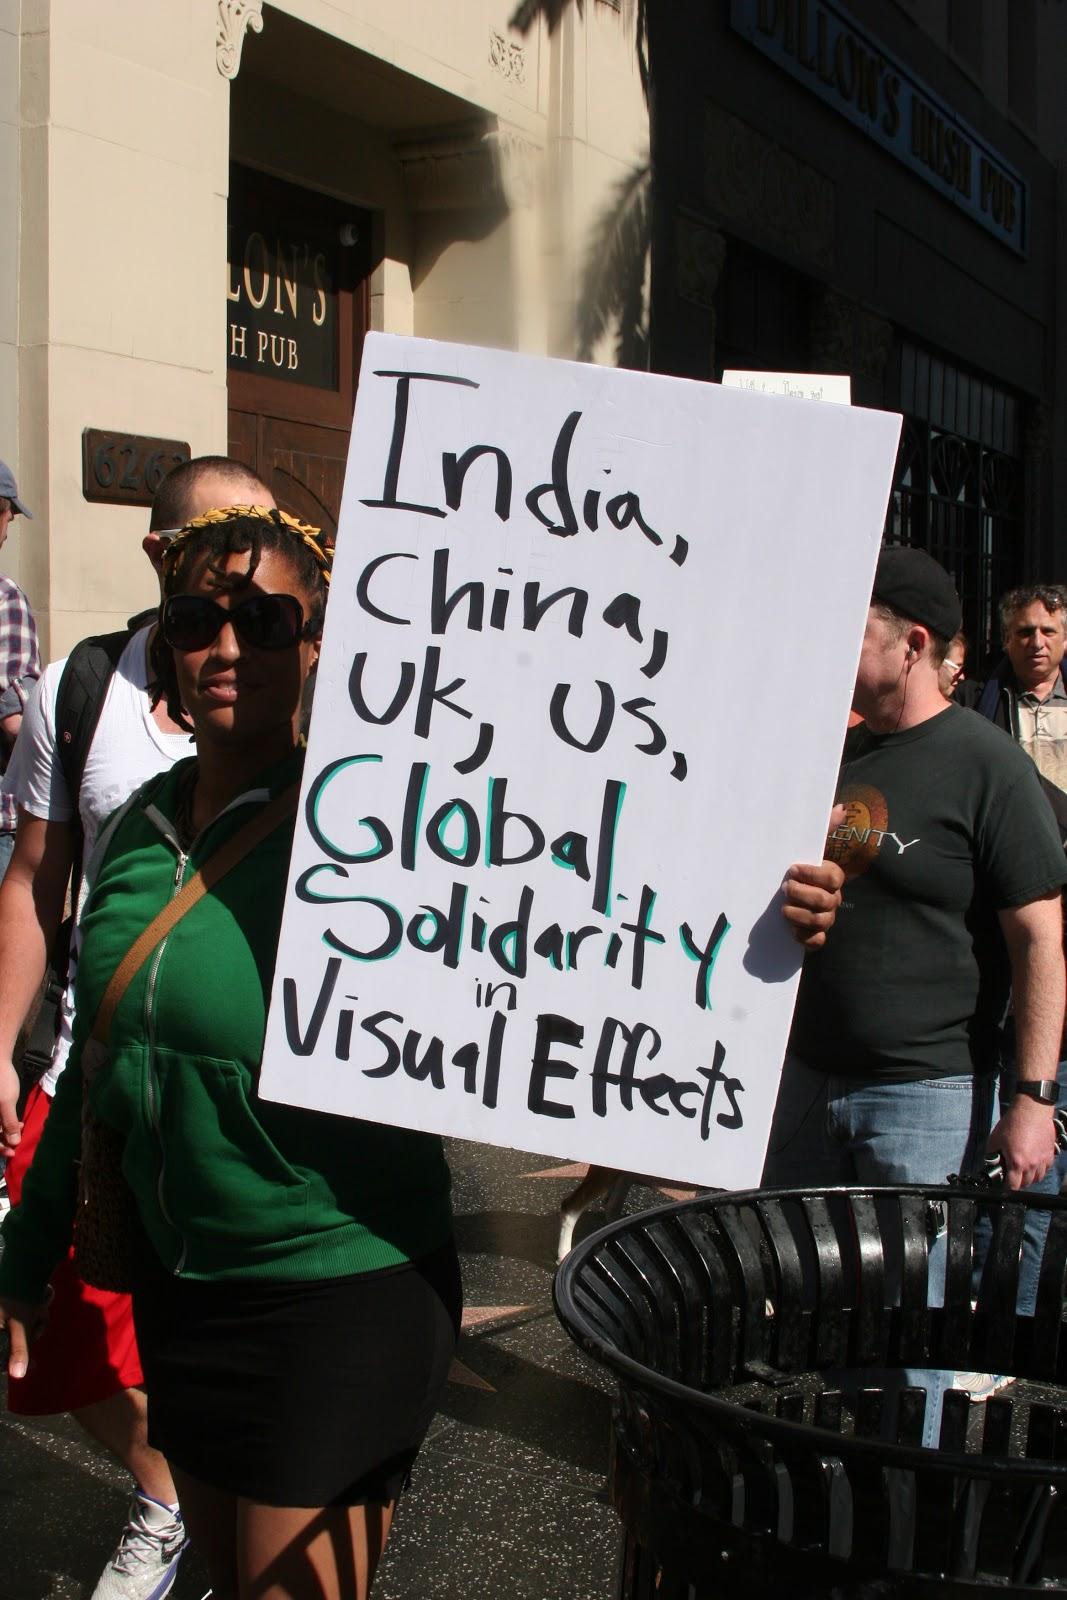 protest sign expressing global solidarity among VFX workers